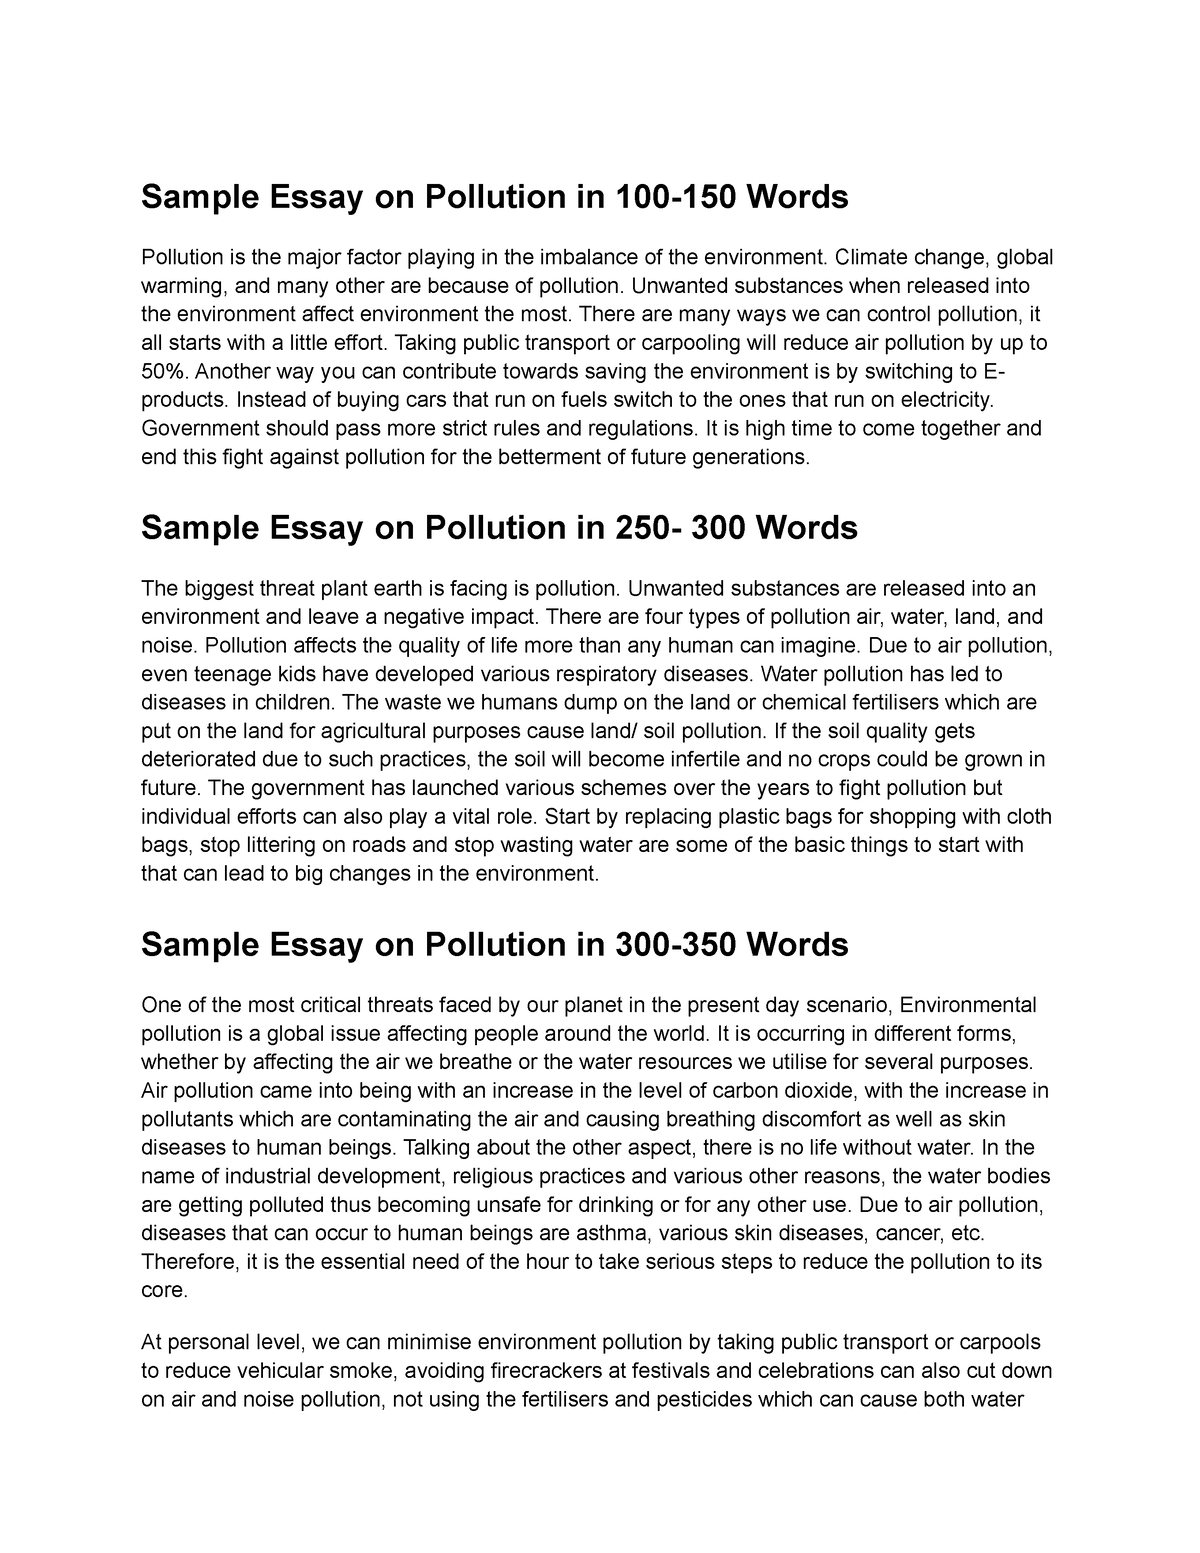 essay on how to control pollution